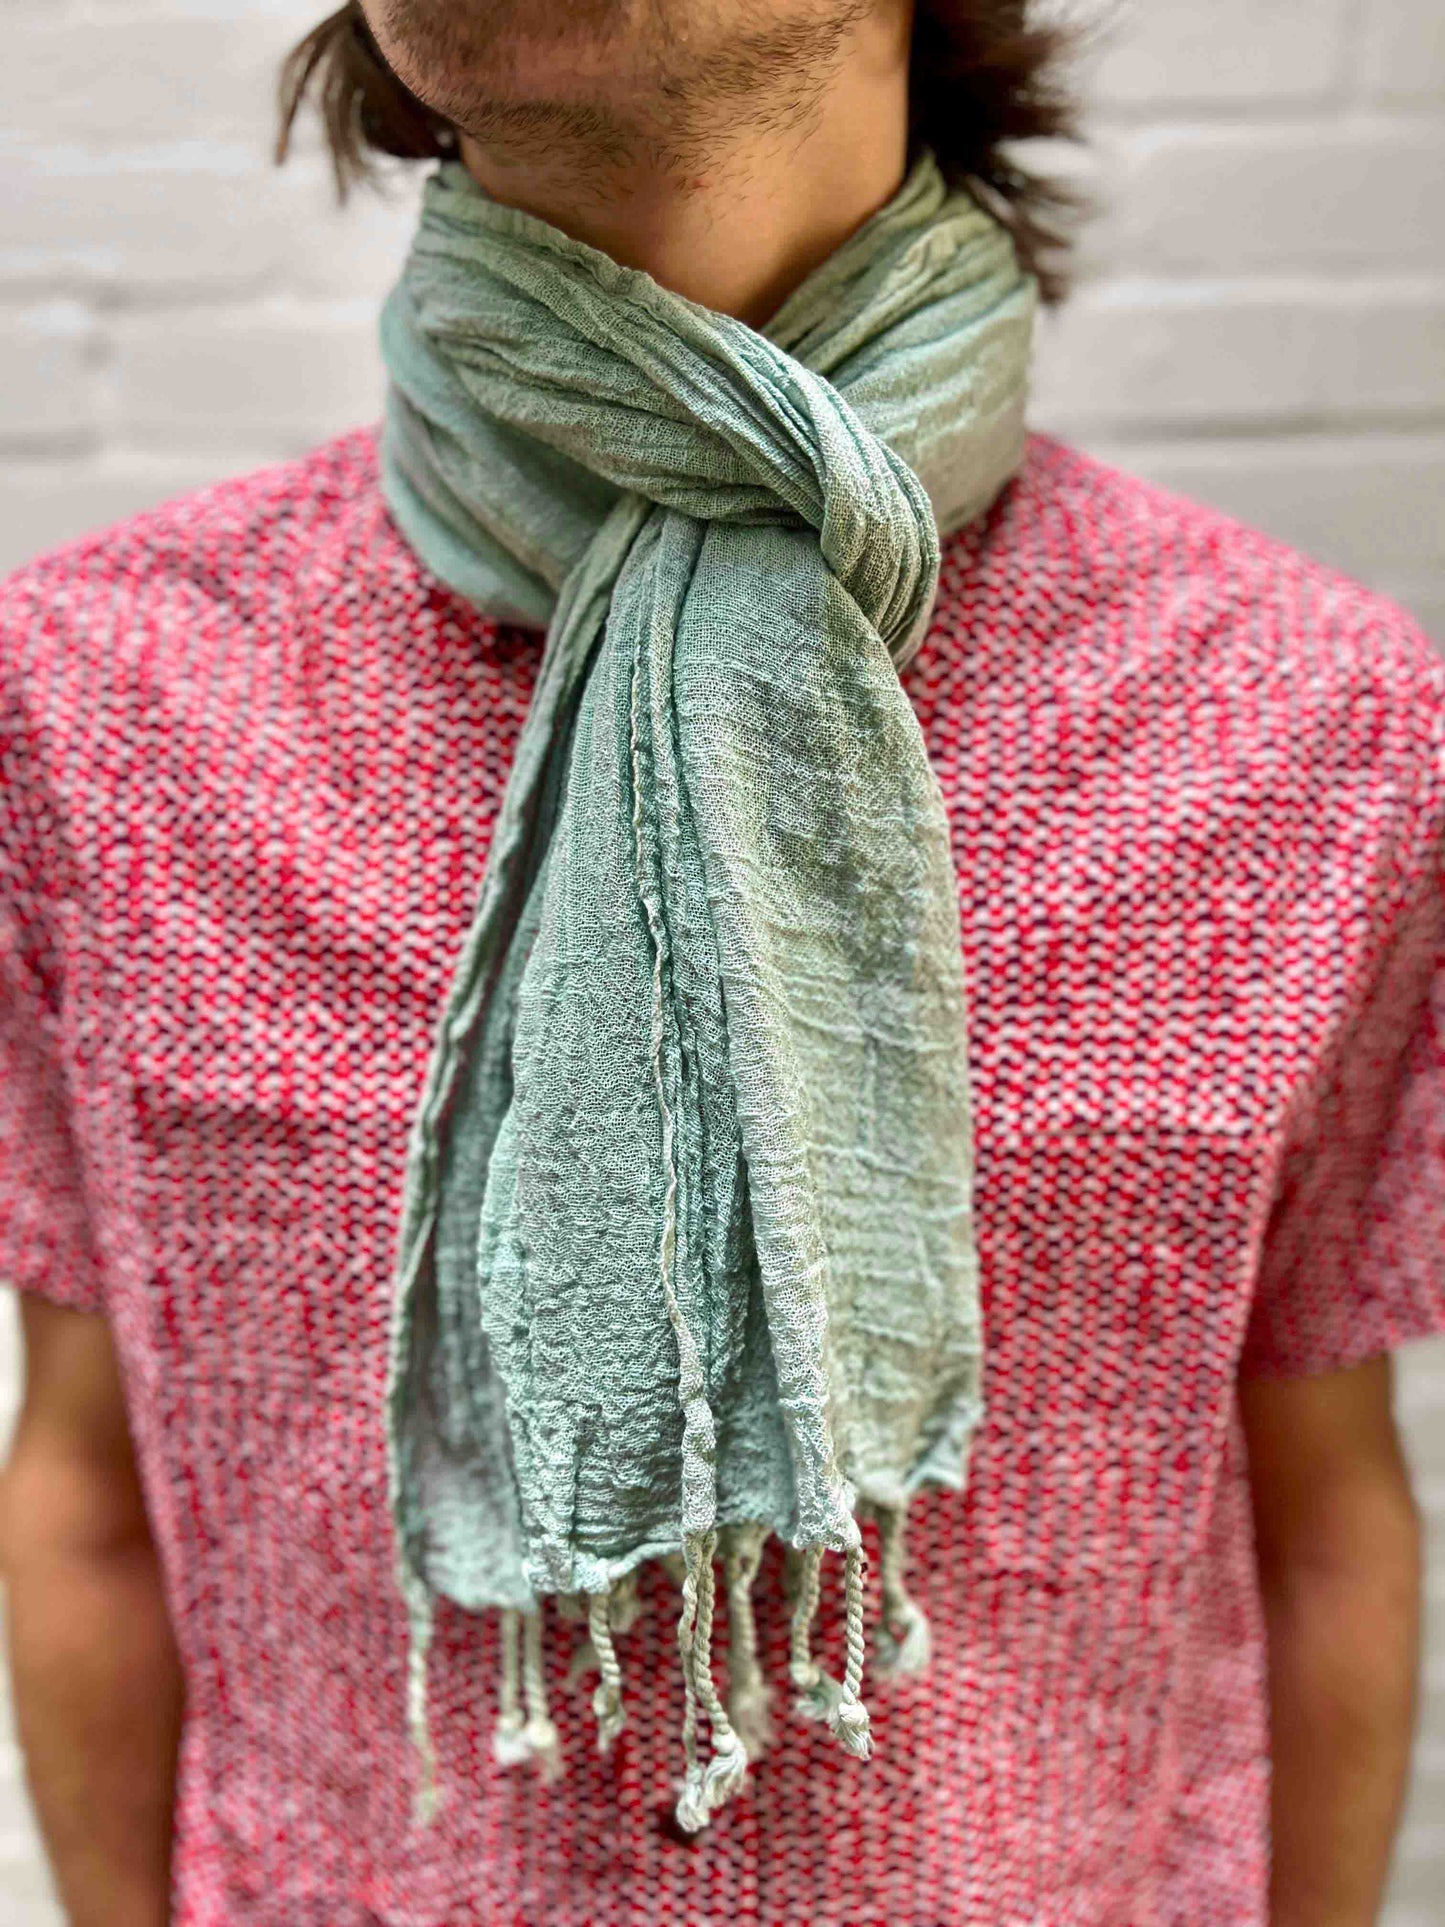 Duck egg blue/green scarf with tassels